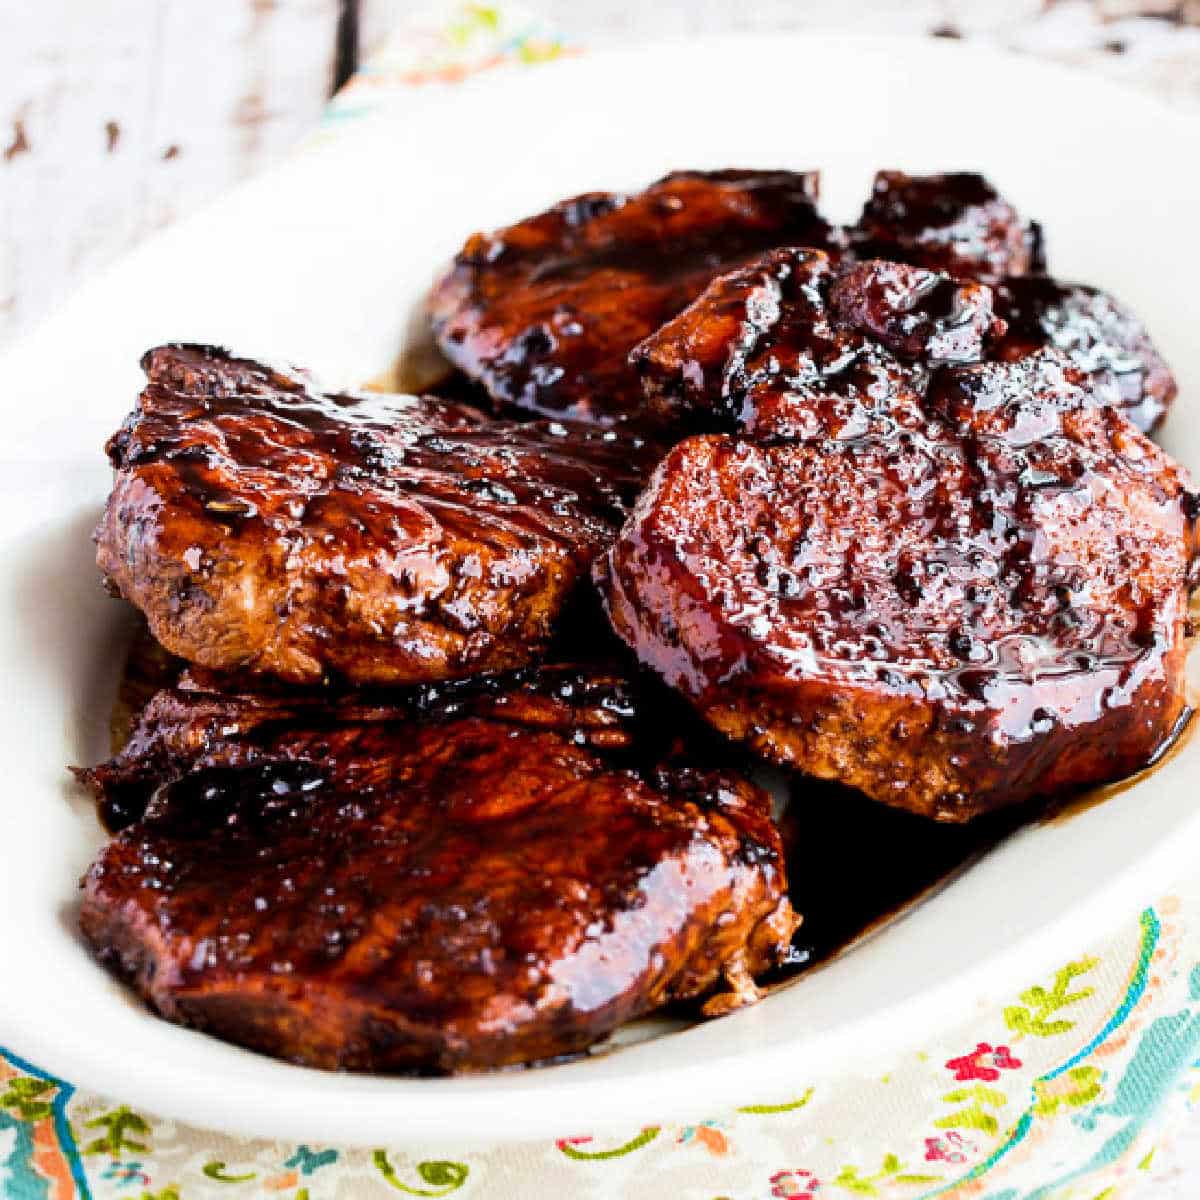 Square image of Pork Chops with Balsamic Glaze shown on serving plate.